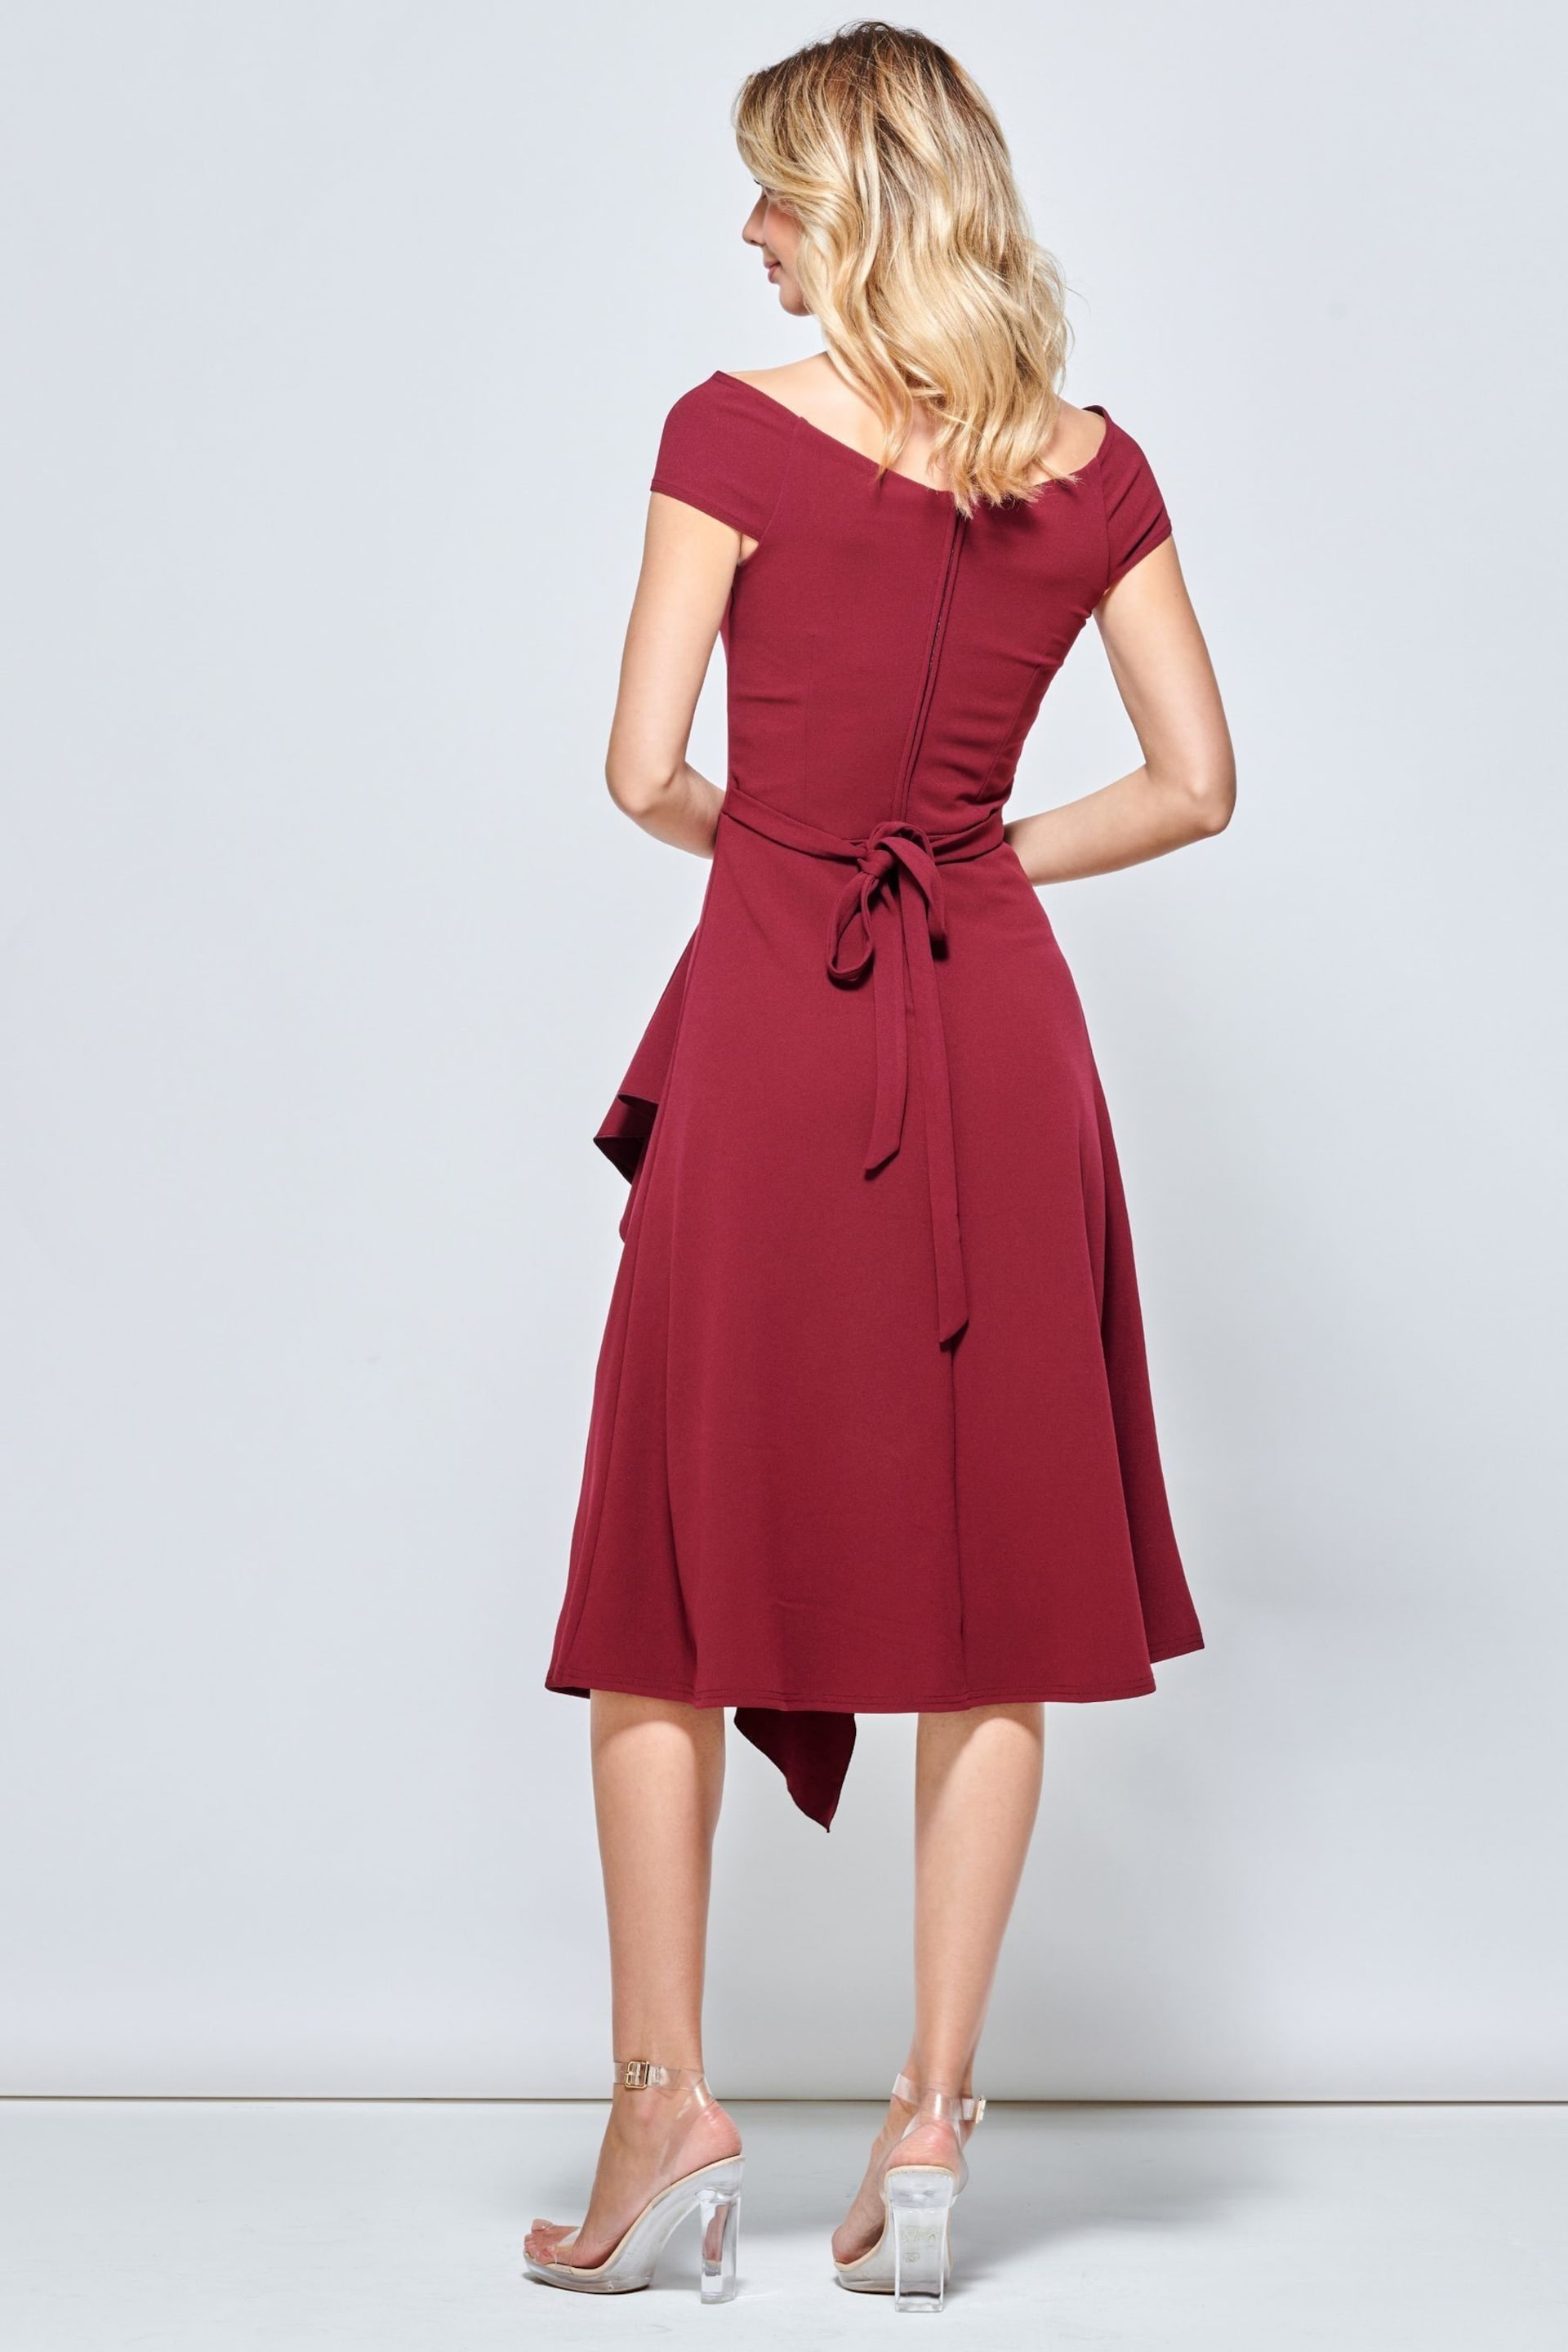 Jolie Moi Red Desiree Frill Fit & Flare Dress - Image 2 of 6